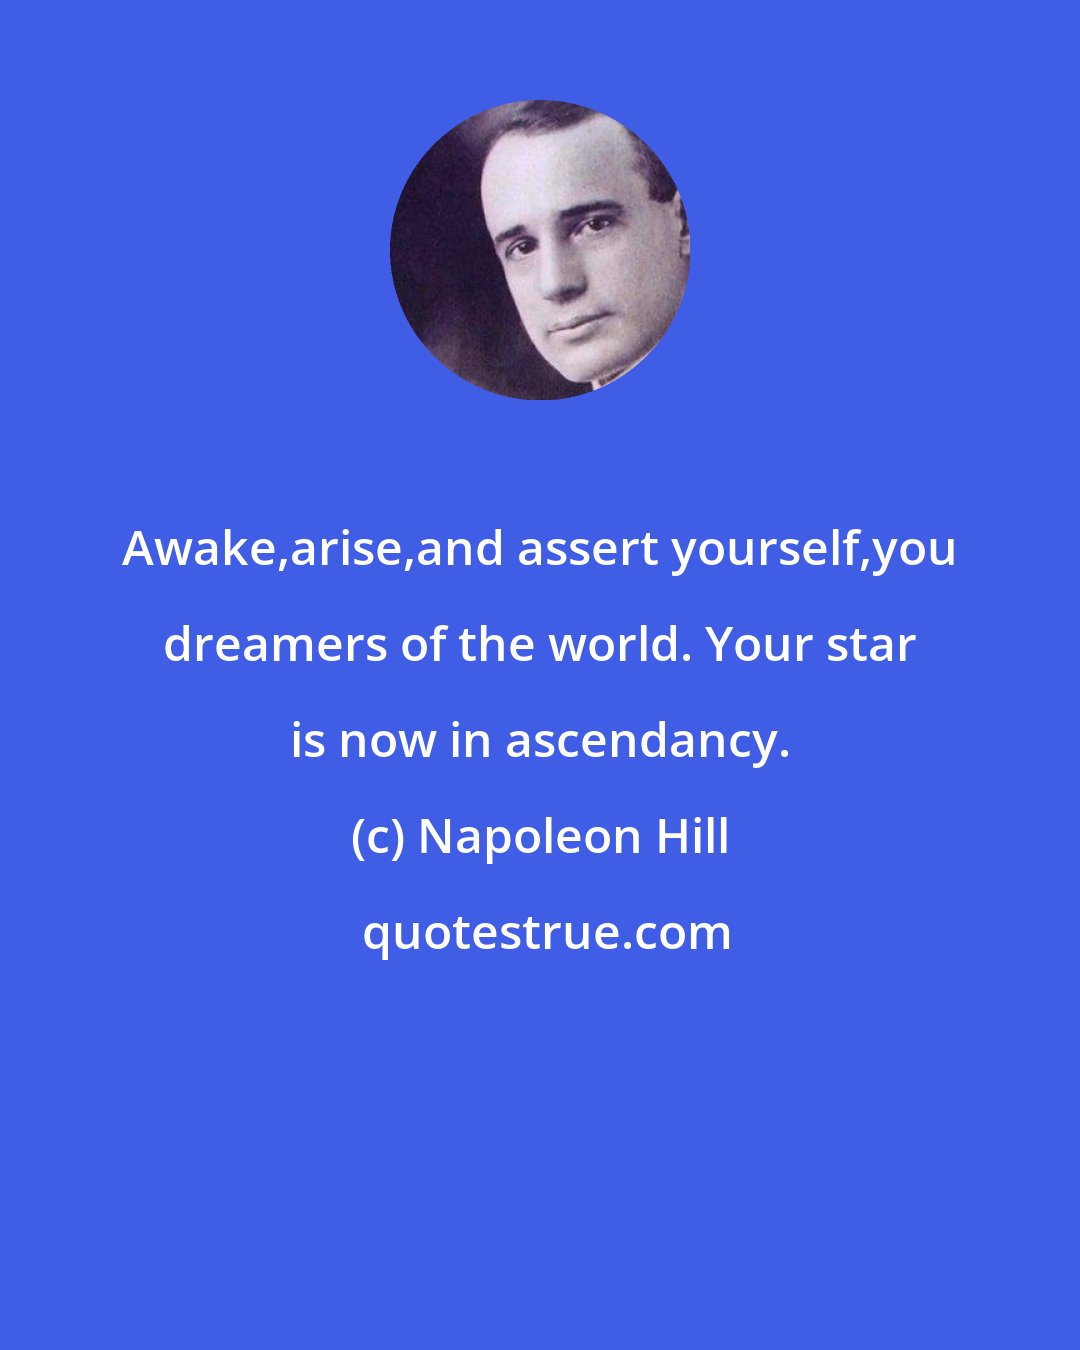 Napoleon Hill: Awake,arise,and assert yourself,you dreamers of the world. Your star is now in ascendancy.